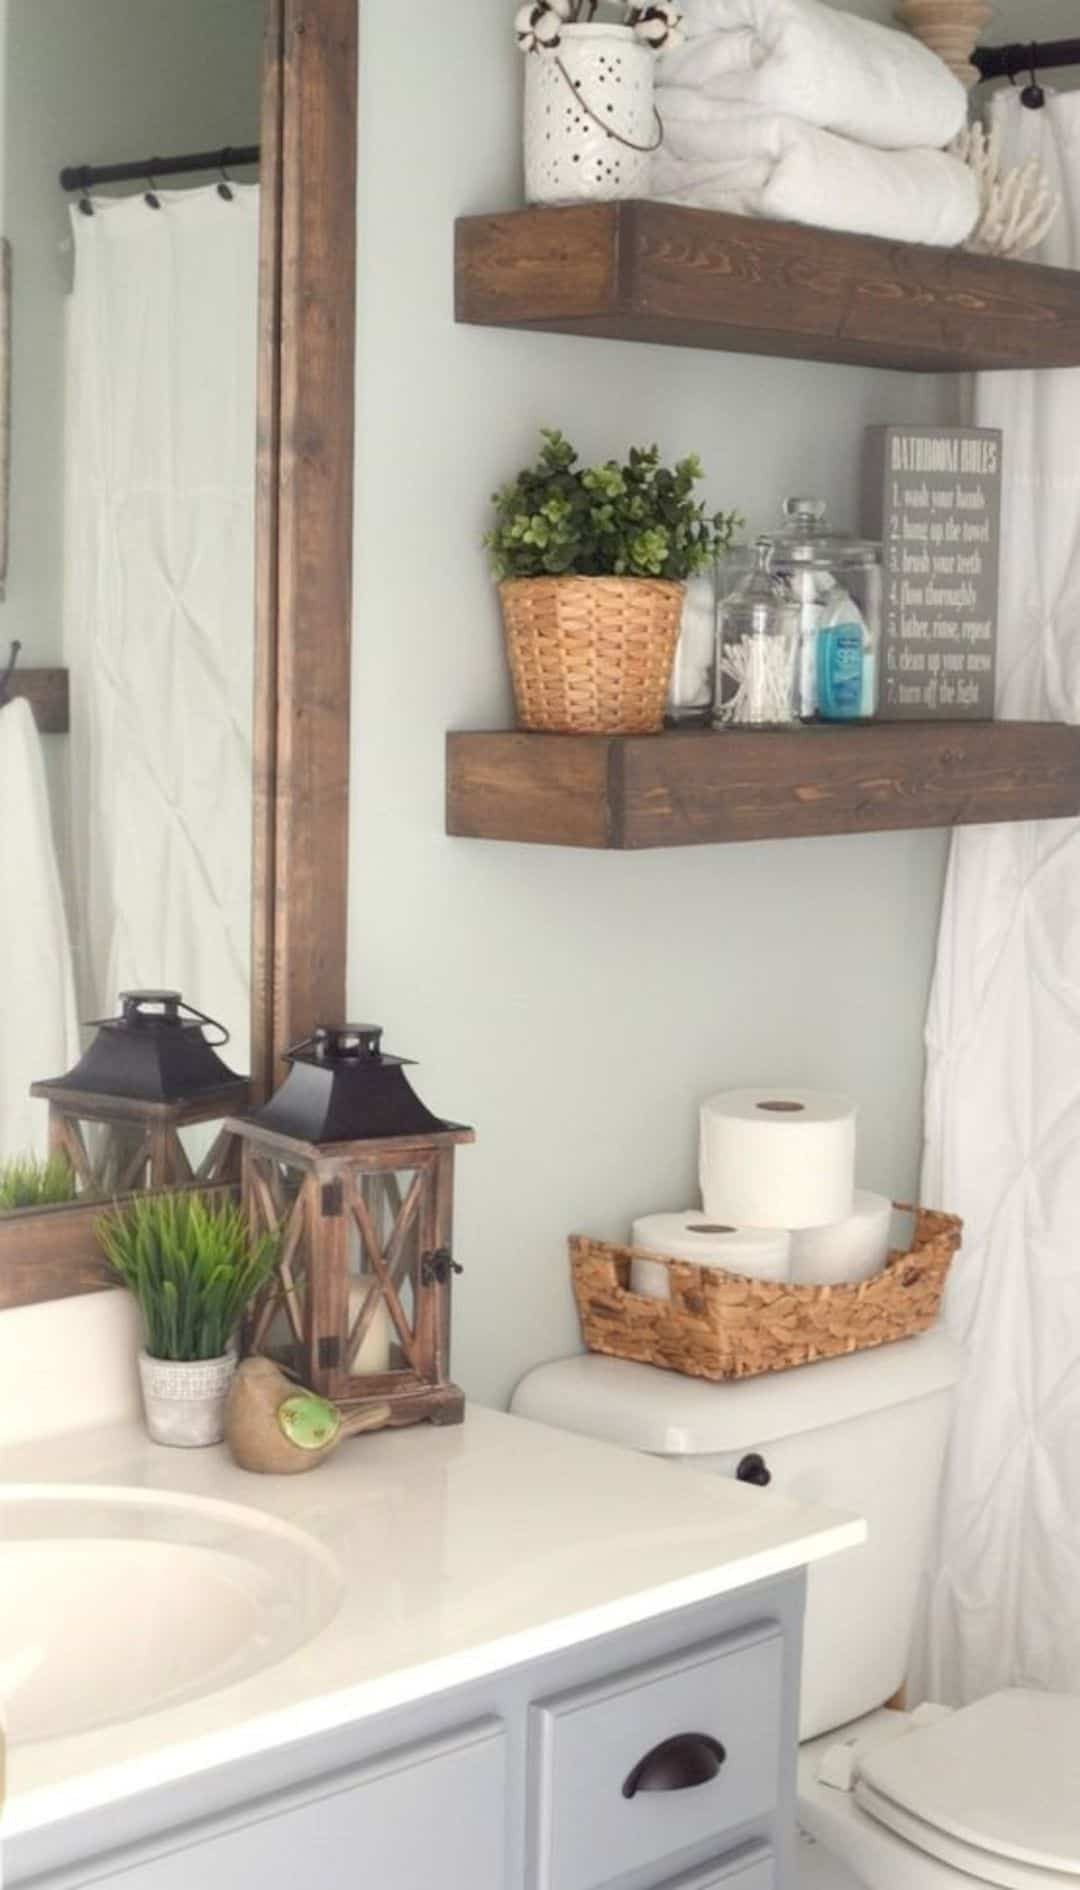 Bathroom Decor Pictures
 17 Awesome Small Bathroom Decorating Ideas